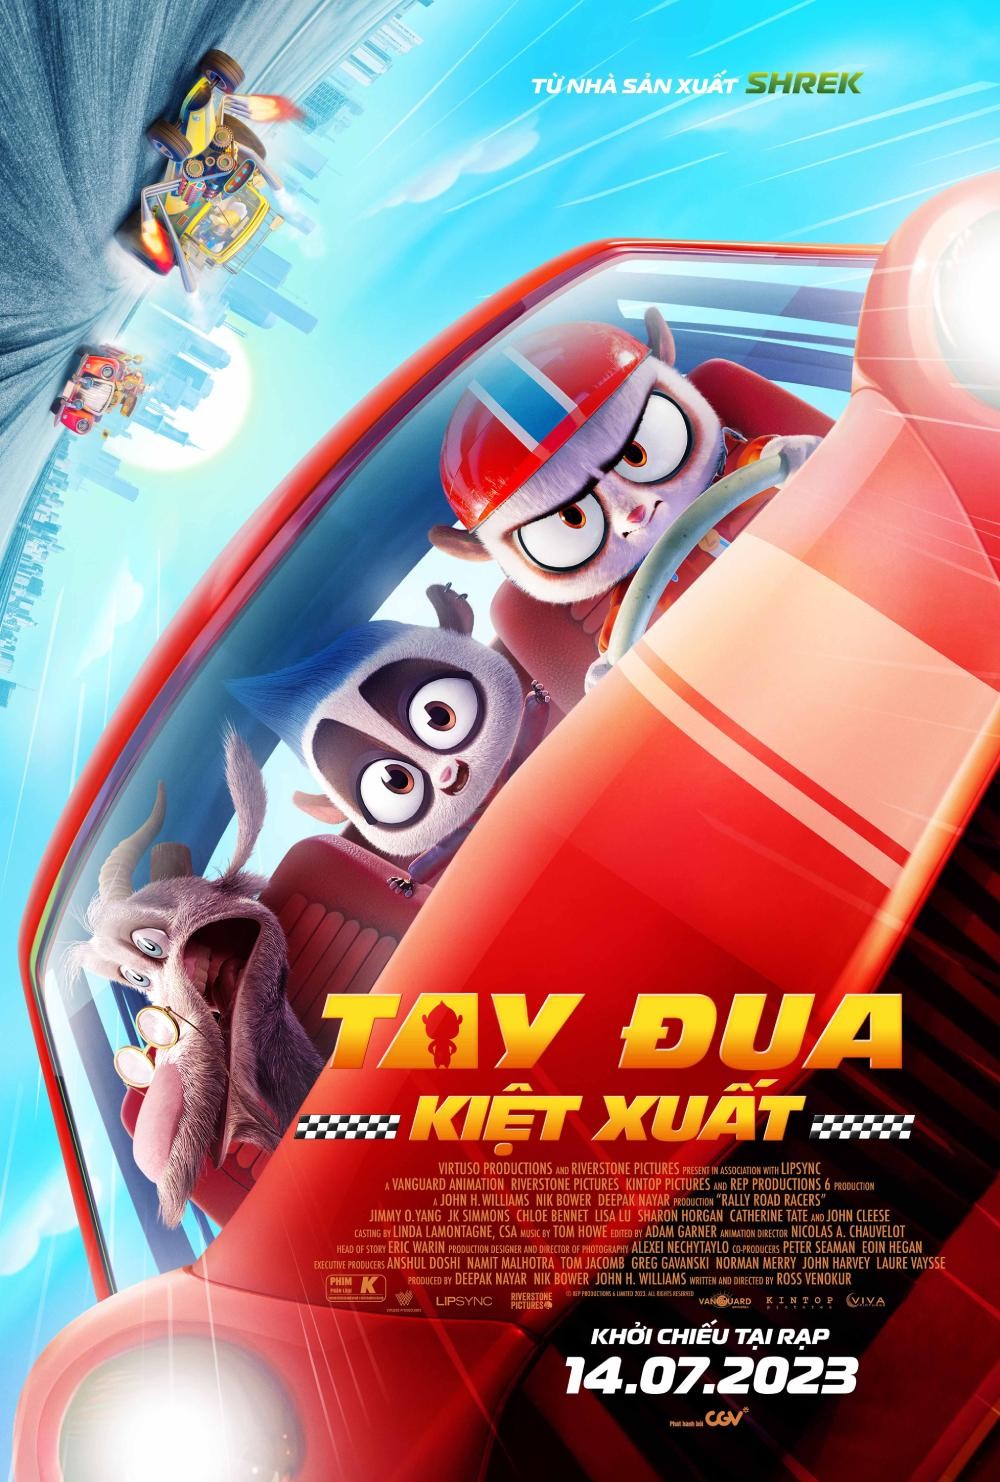 Poster Phim Tay Đua Kiệt Xuất (Rally Road Racers)